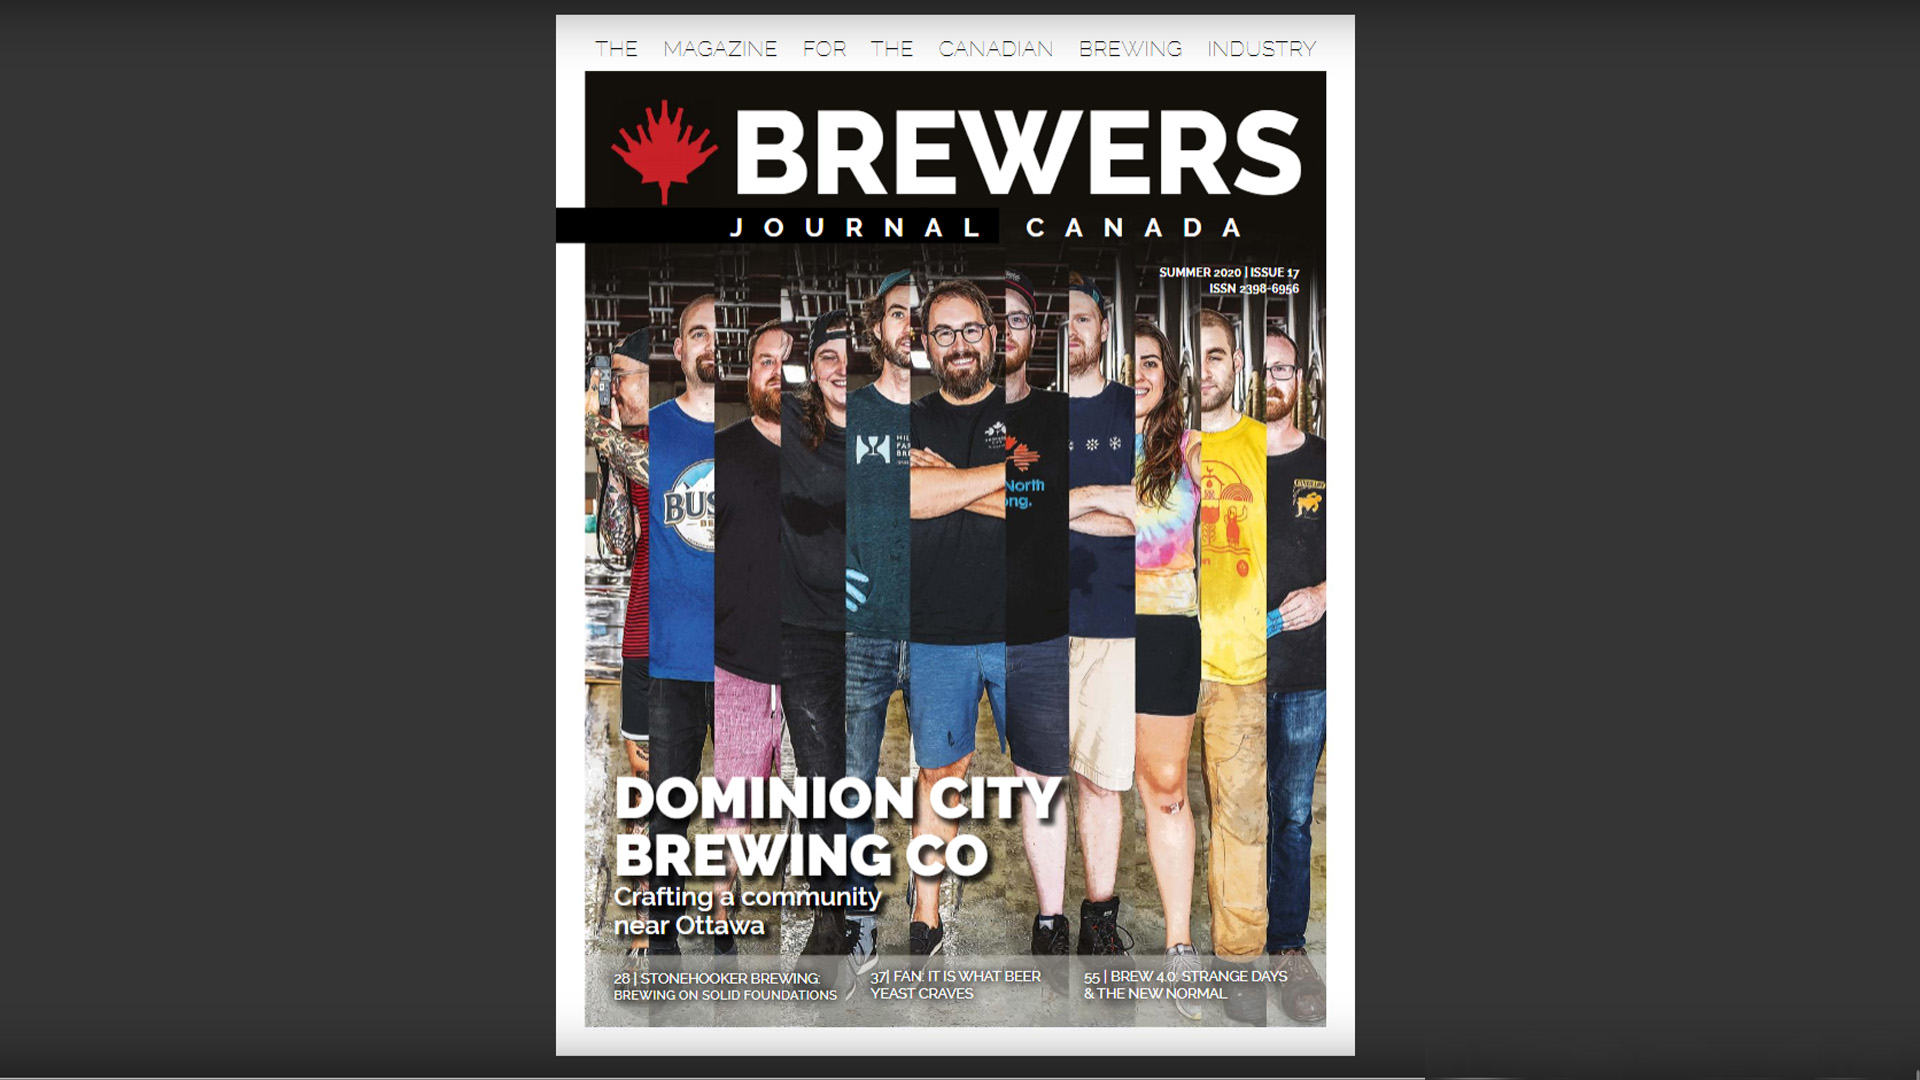 Brewers Journal Canada